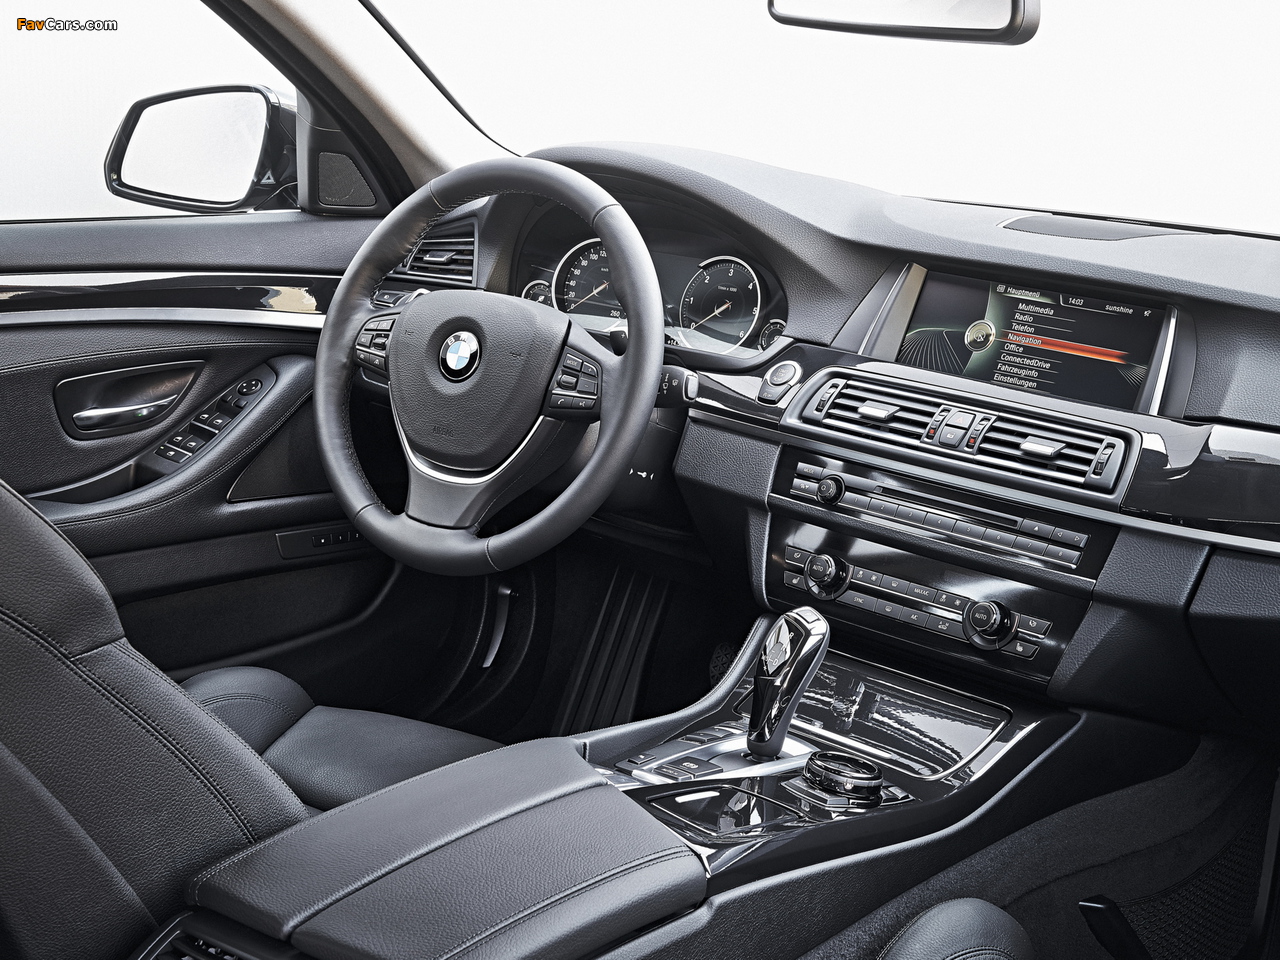 BMW 520d Touring (F11) 2013 pictures (1280 x 960)